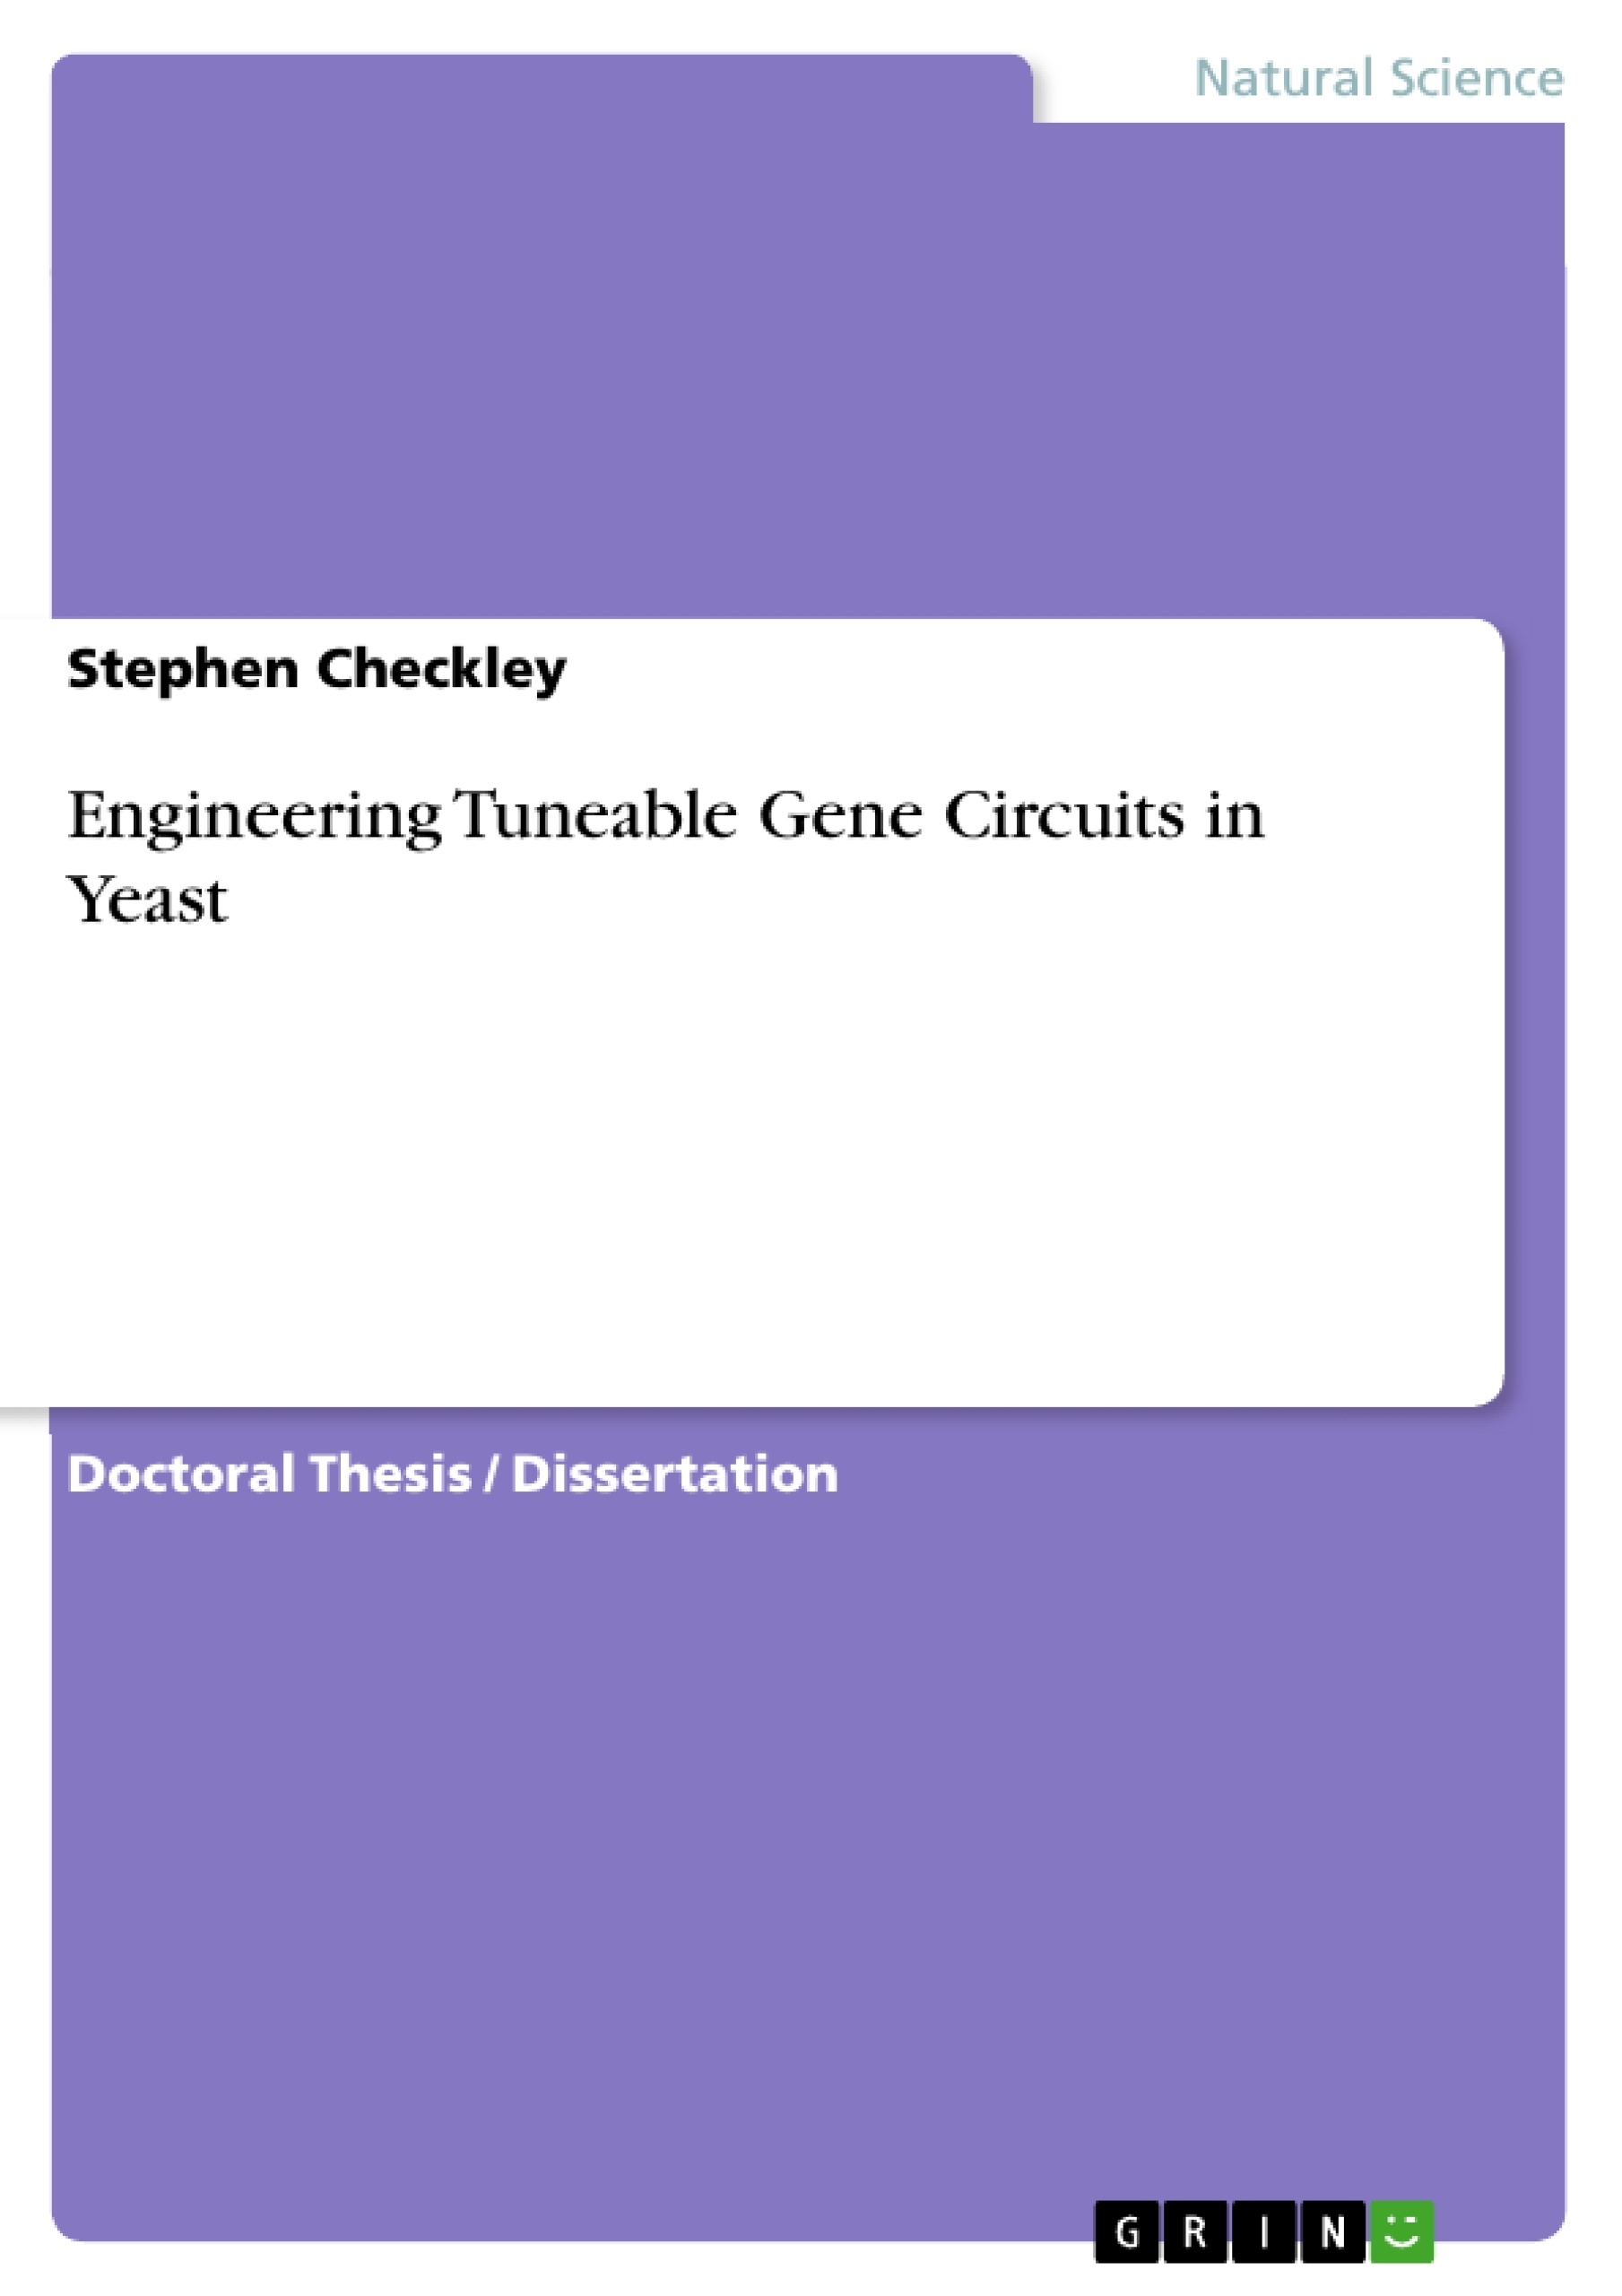 Title: Engineering Tuneable Gene Circuits in Yeast